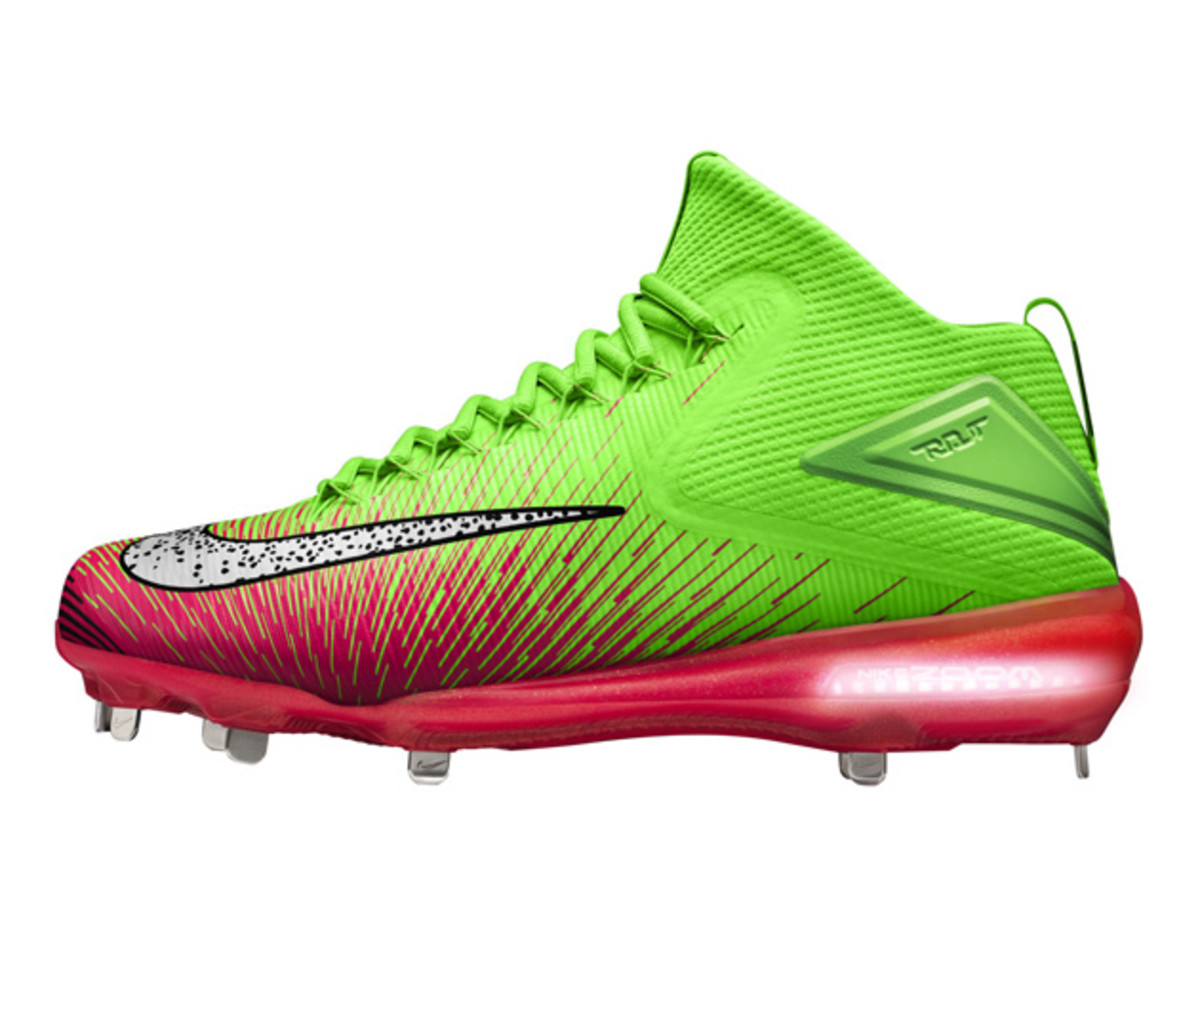 Nike reveals third signature cleat for 